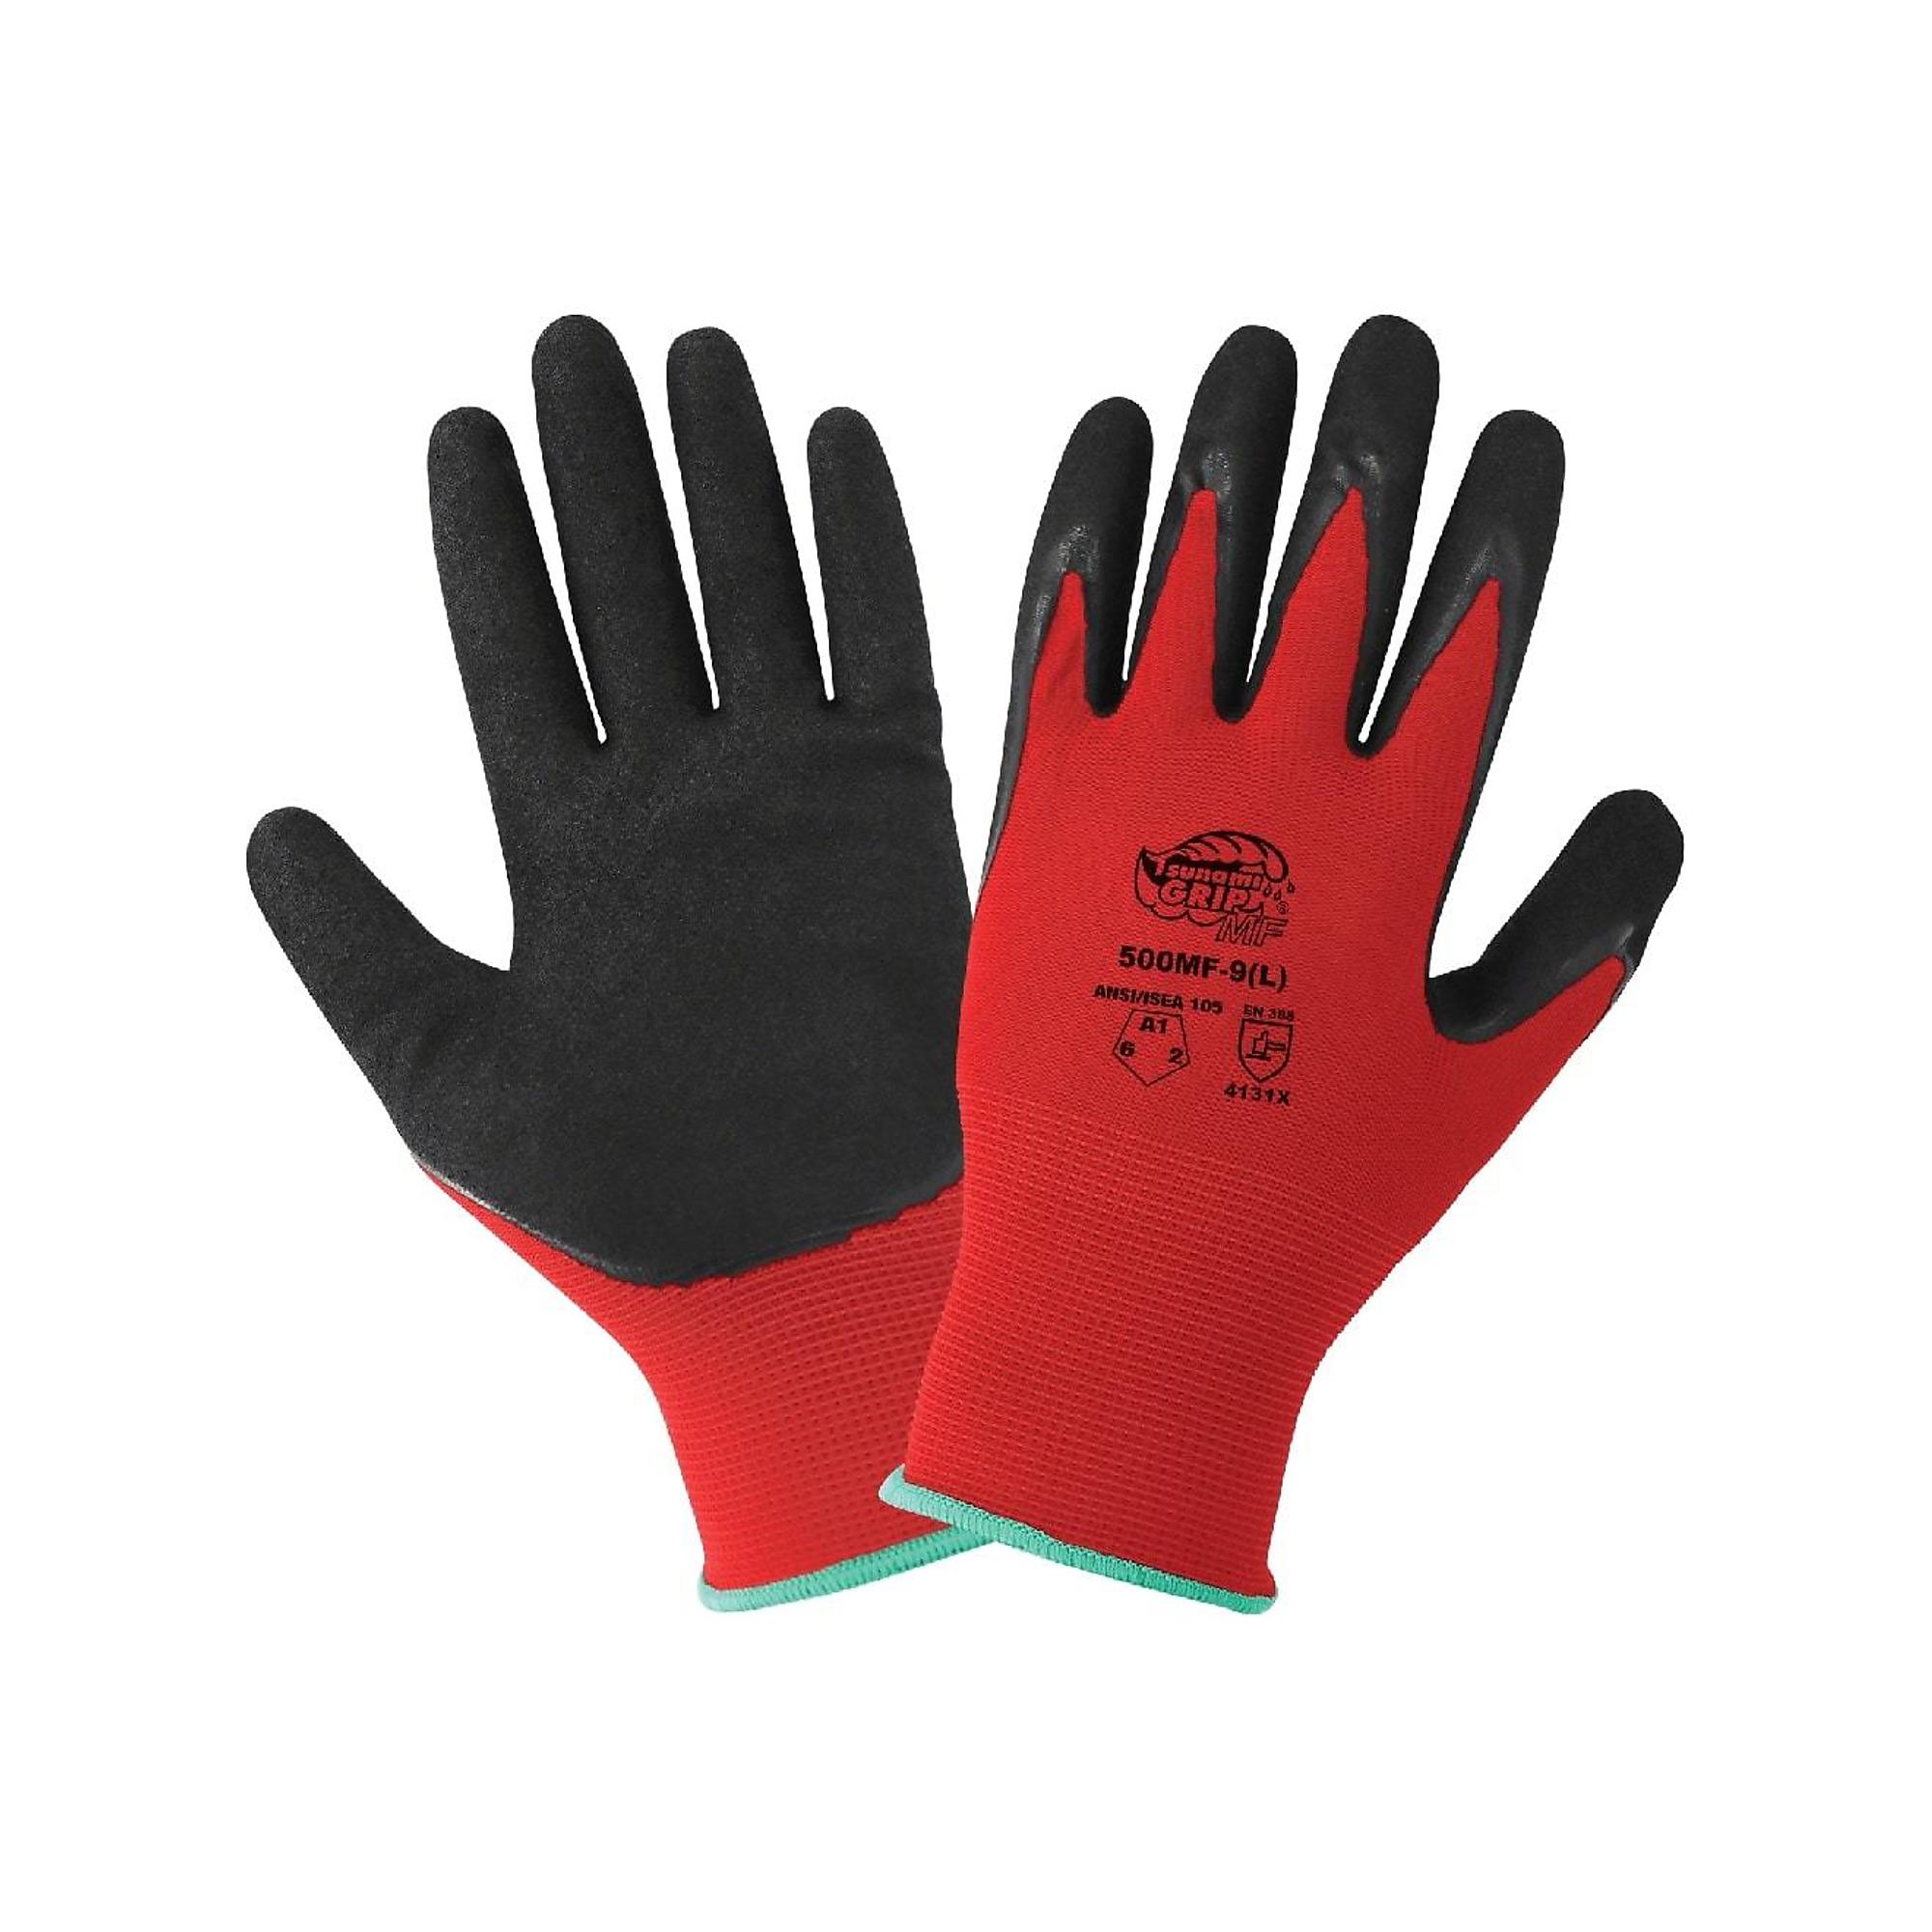 Global Glove Tsunami Grip , Red, Black Double Nitrile Coat, Cut Resist A1 Gloves-12 Pair, Size S, Color Red/Black, Included (qty.) 12 Model 500MF-7(S)